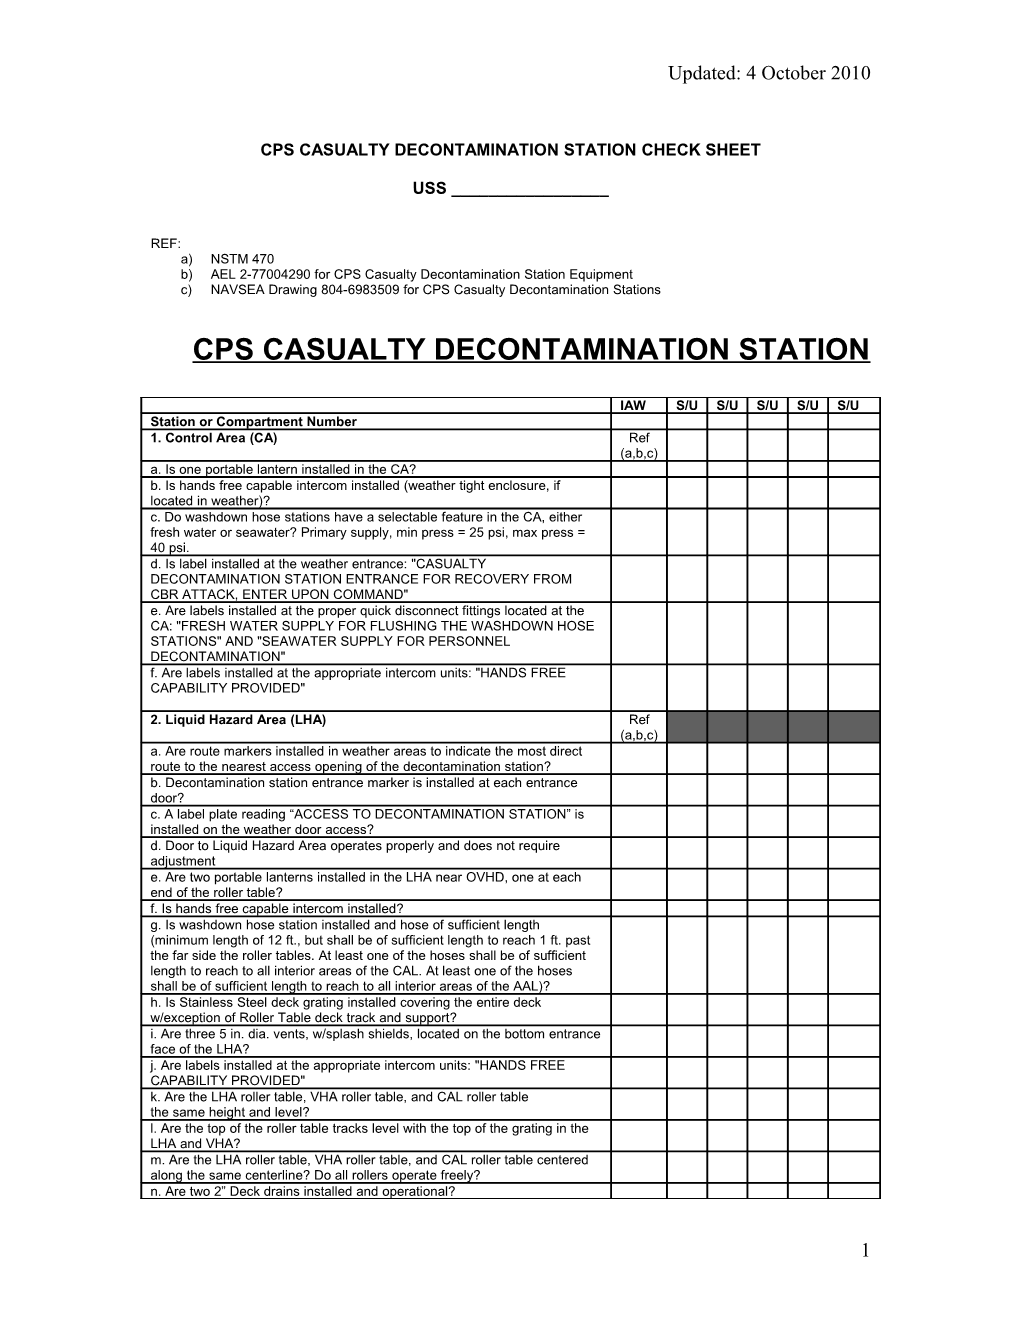 Cps Casualty Decontamination Station Check Sheet